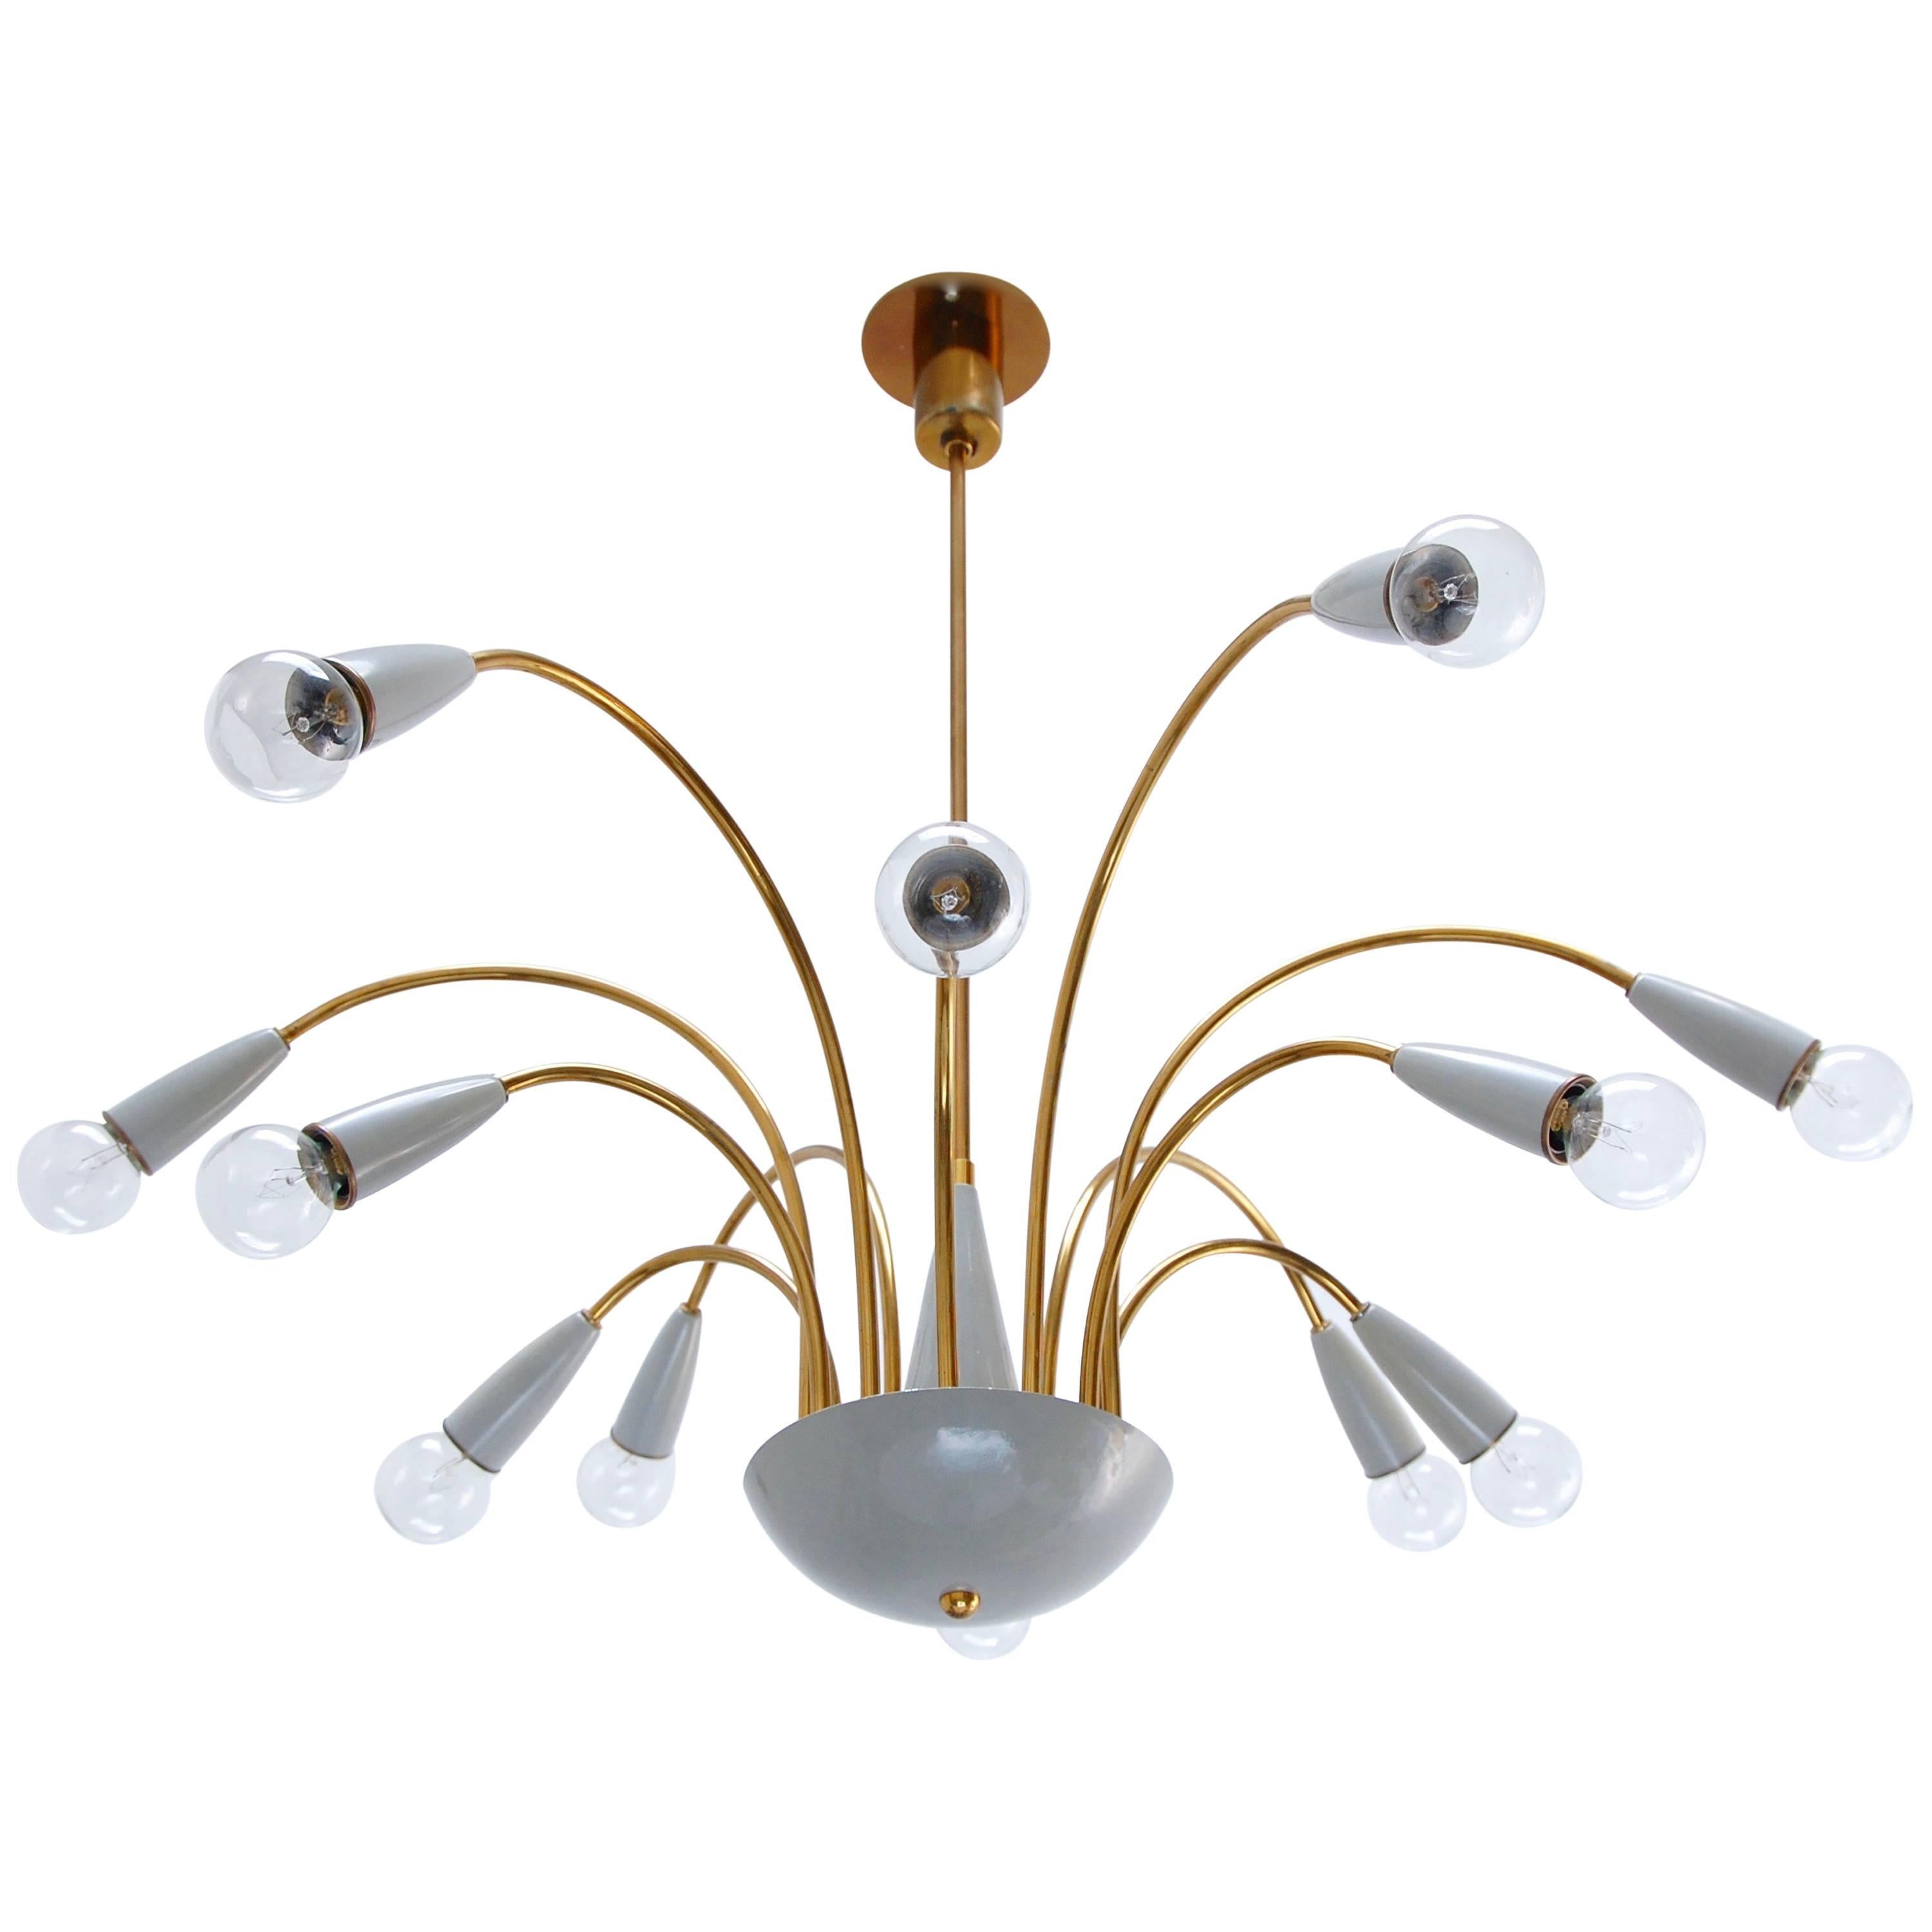 Botanical 1960s Chandelier from Italy